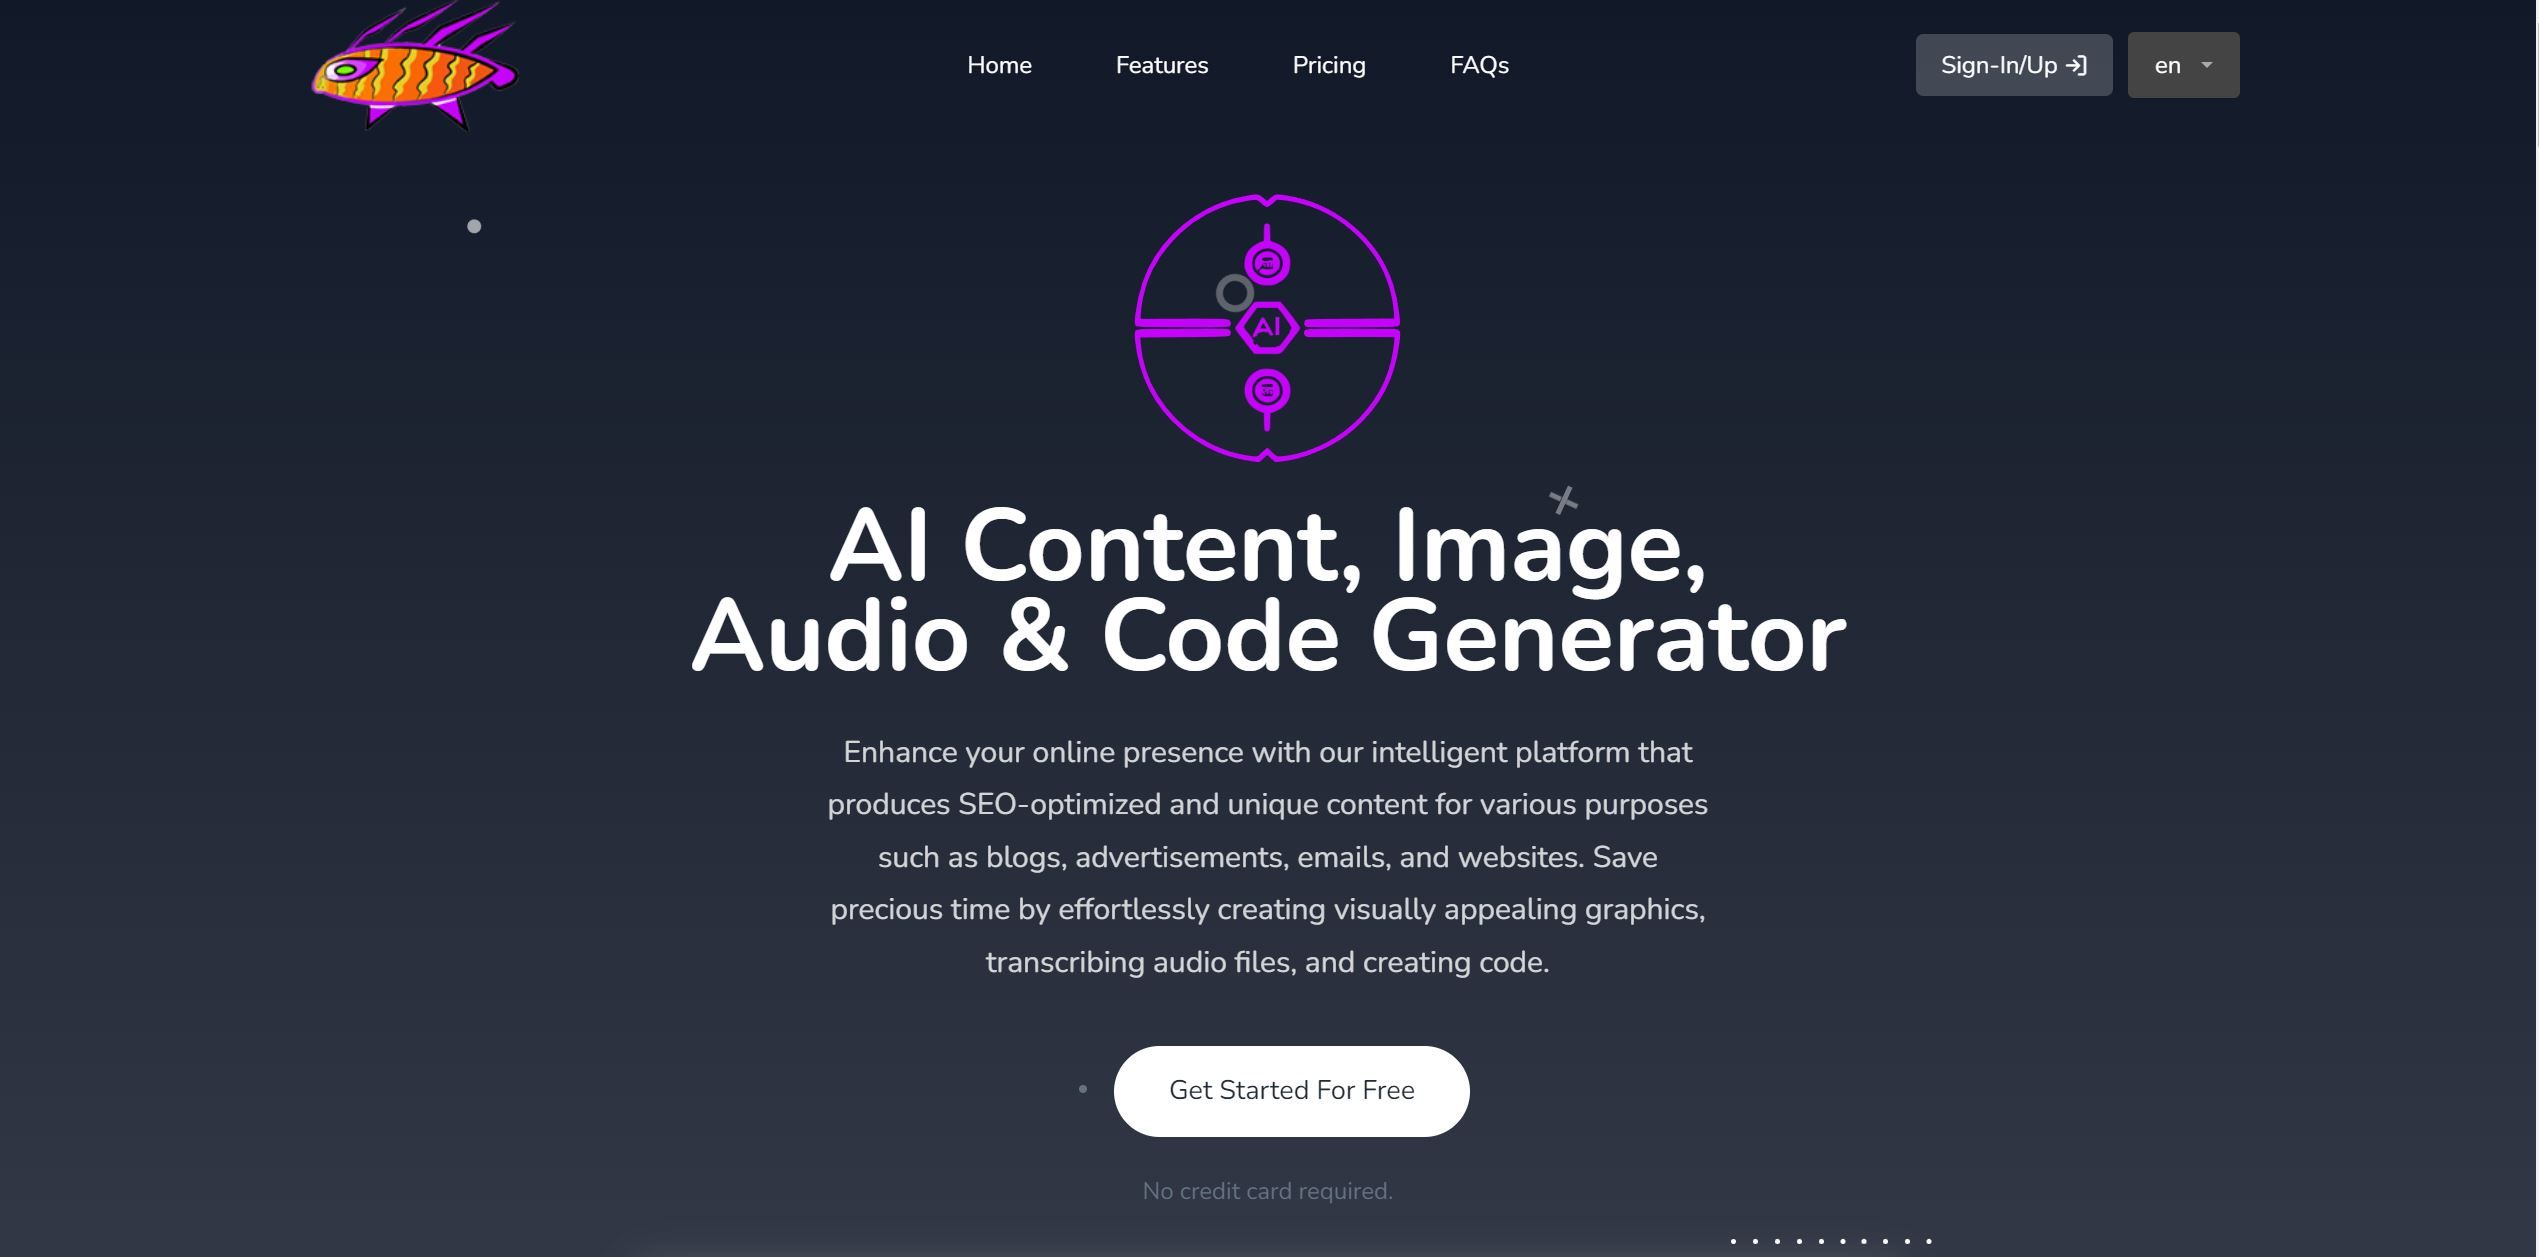 Slyfish Slyfish is an AI powered platform designed to generate content